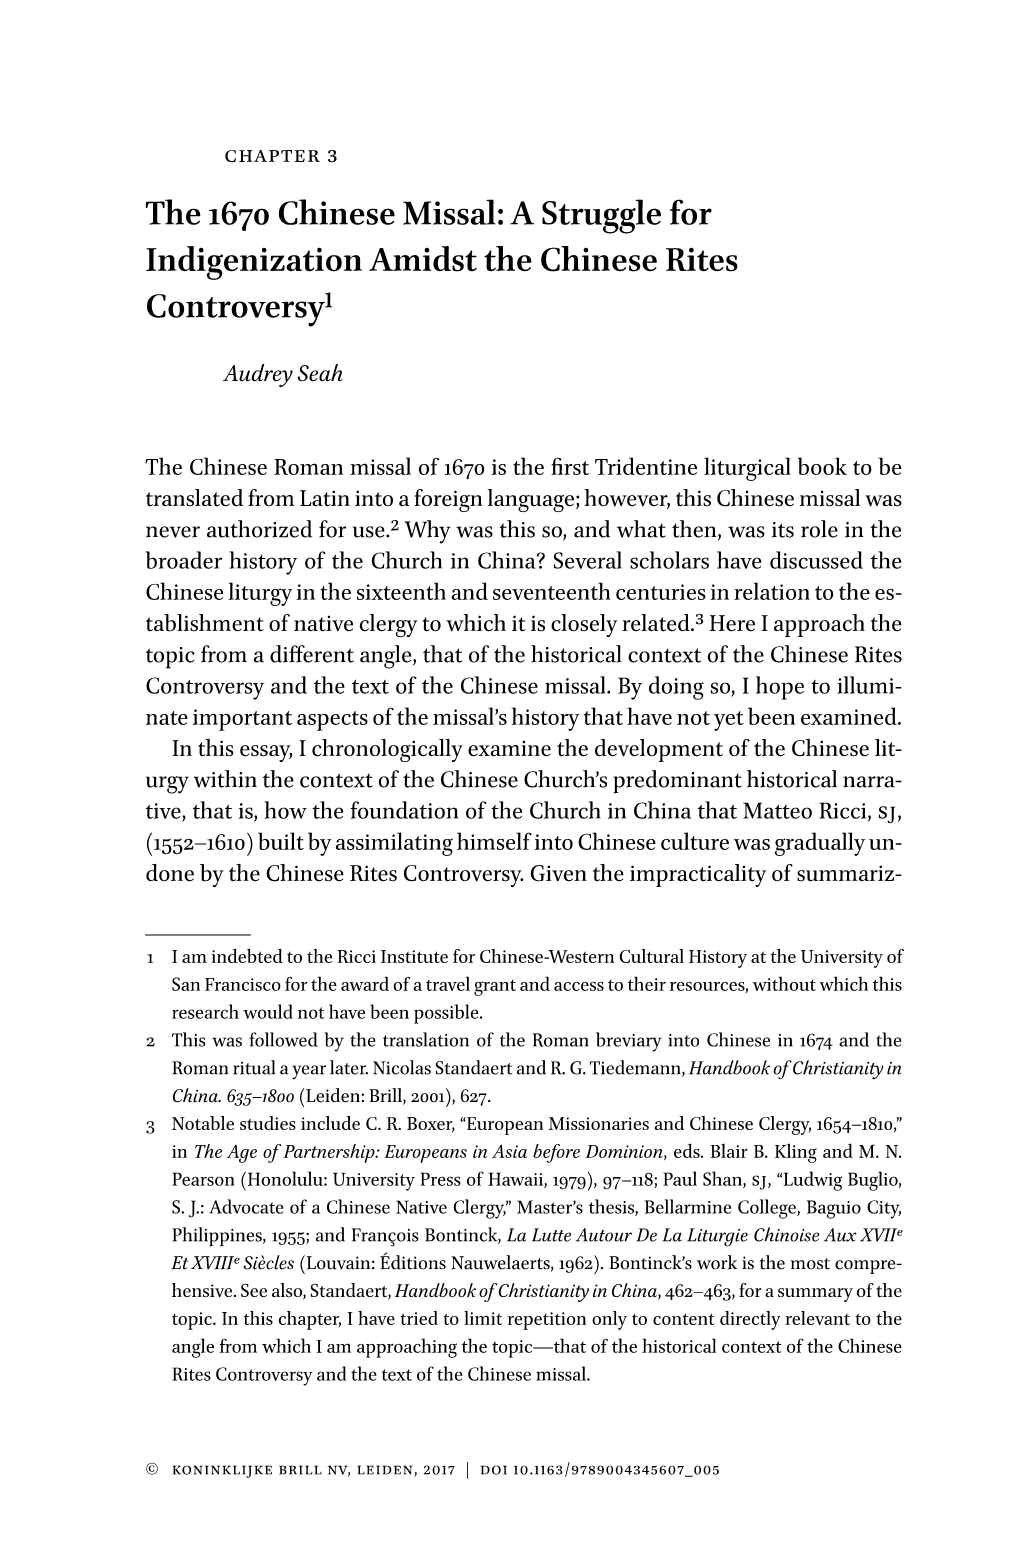 The 1670 Chinese Missal: a Struggle for Indigenization Amidst the Chinese Rites Controversy1